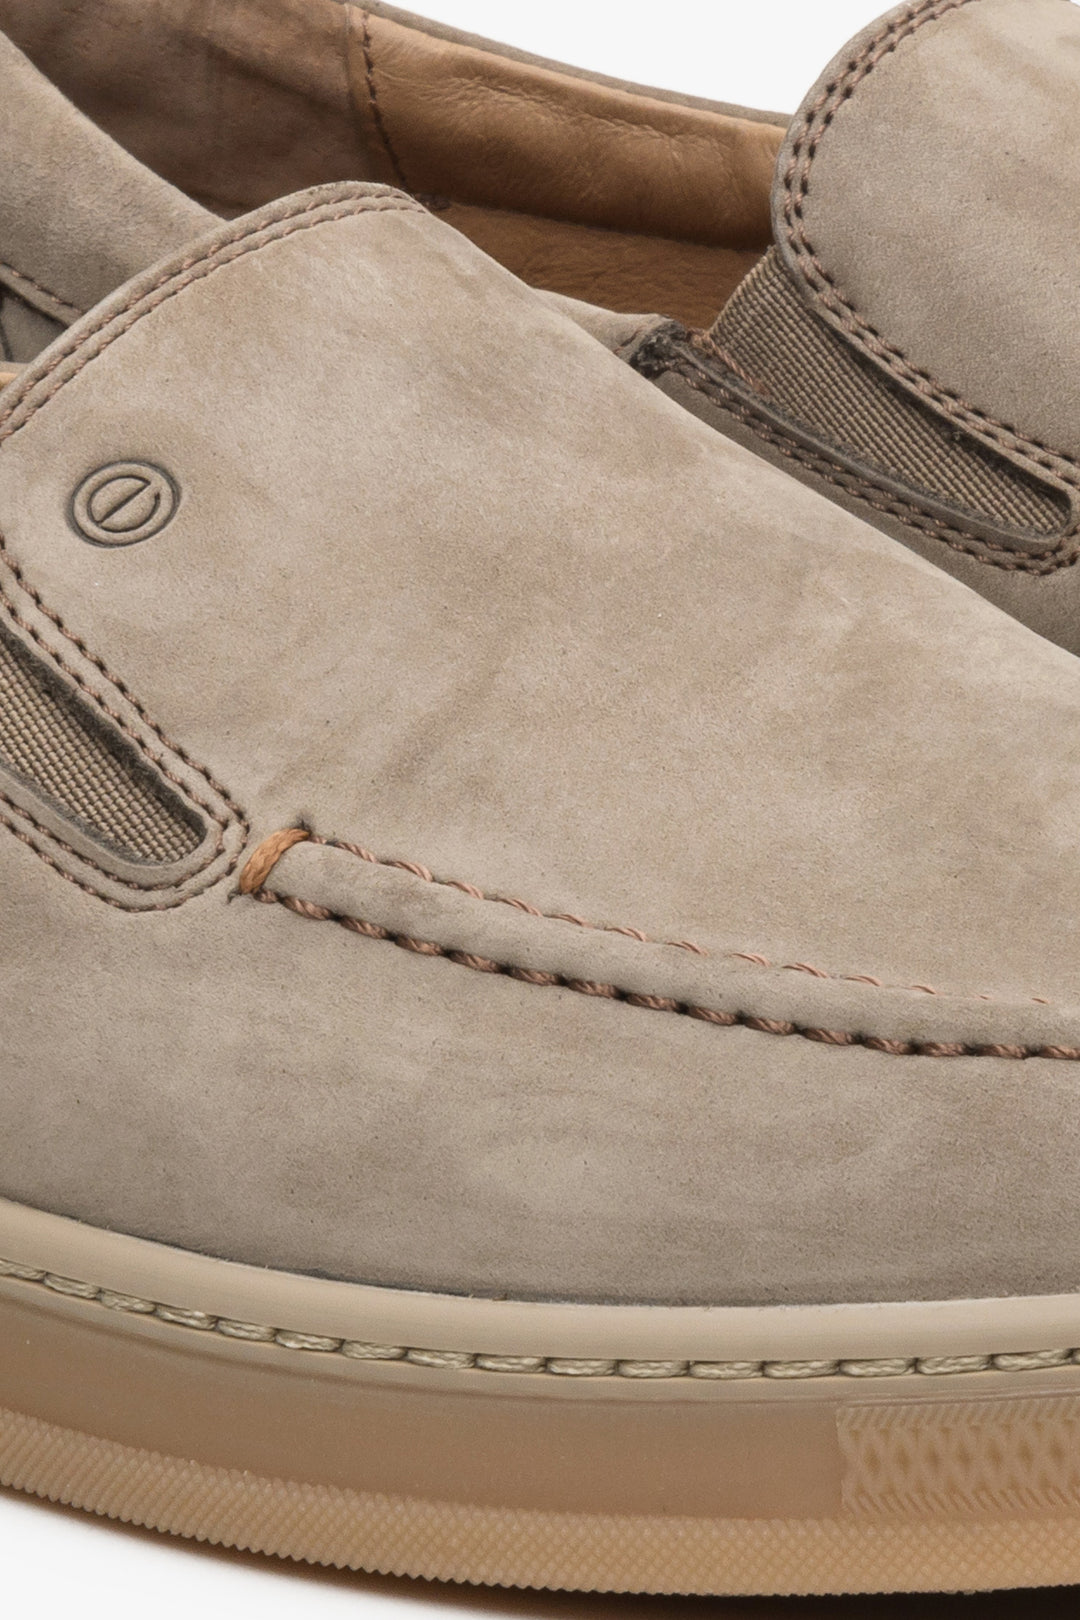 Brown nubuck Estro men's slip-on loafers - close-up of the stitching system.